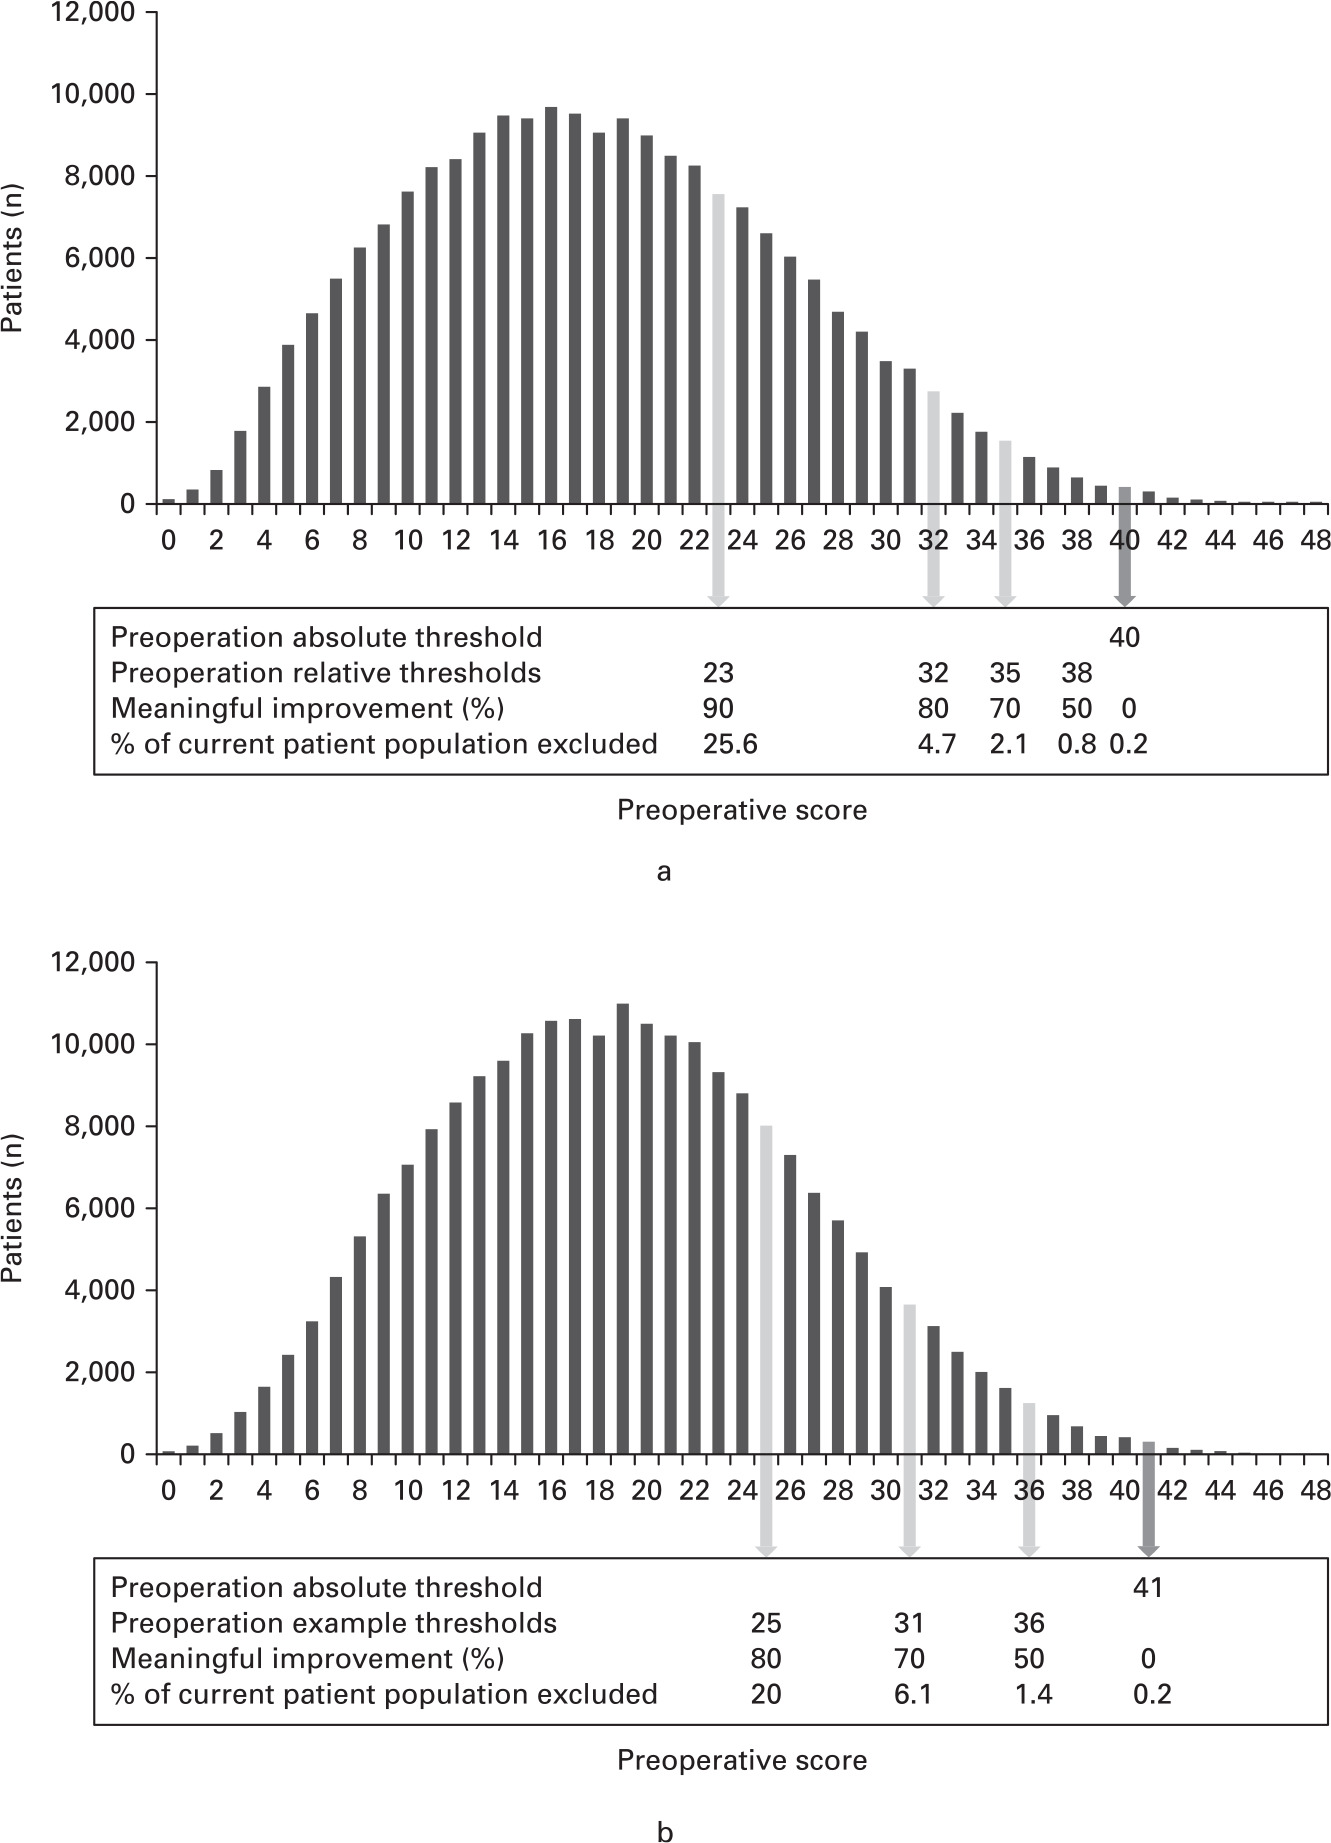 Fig. 4 
            Frequency plots of the preoperative scores recorded for a) hip and b) knee arthroplasty between 2009 and 2015, showing the effect of preoperative thresholds on current practice.
          